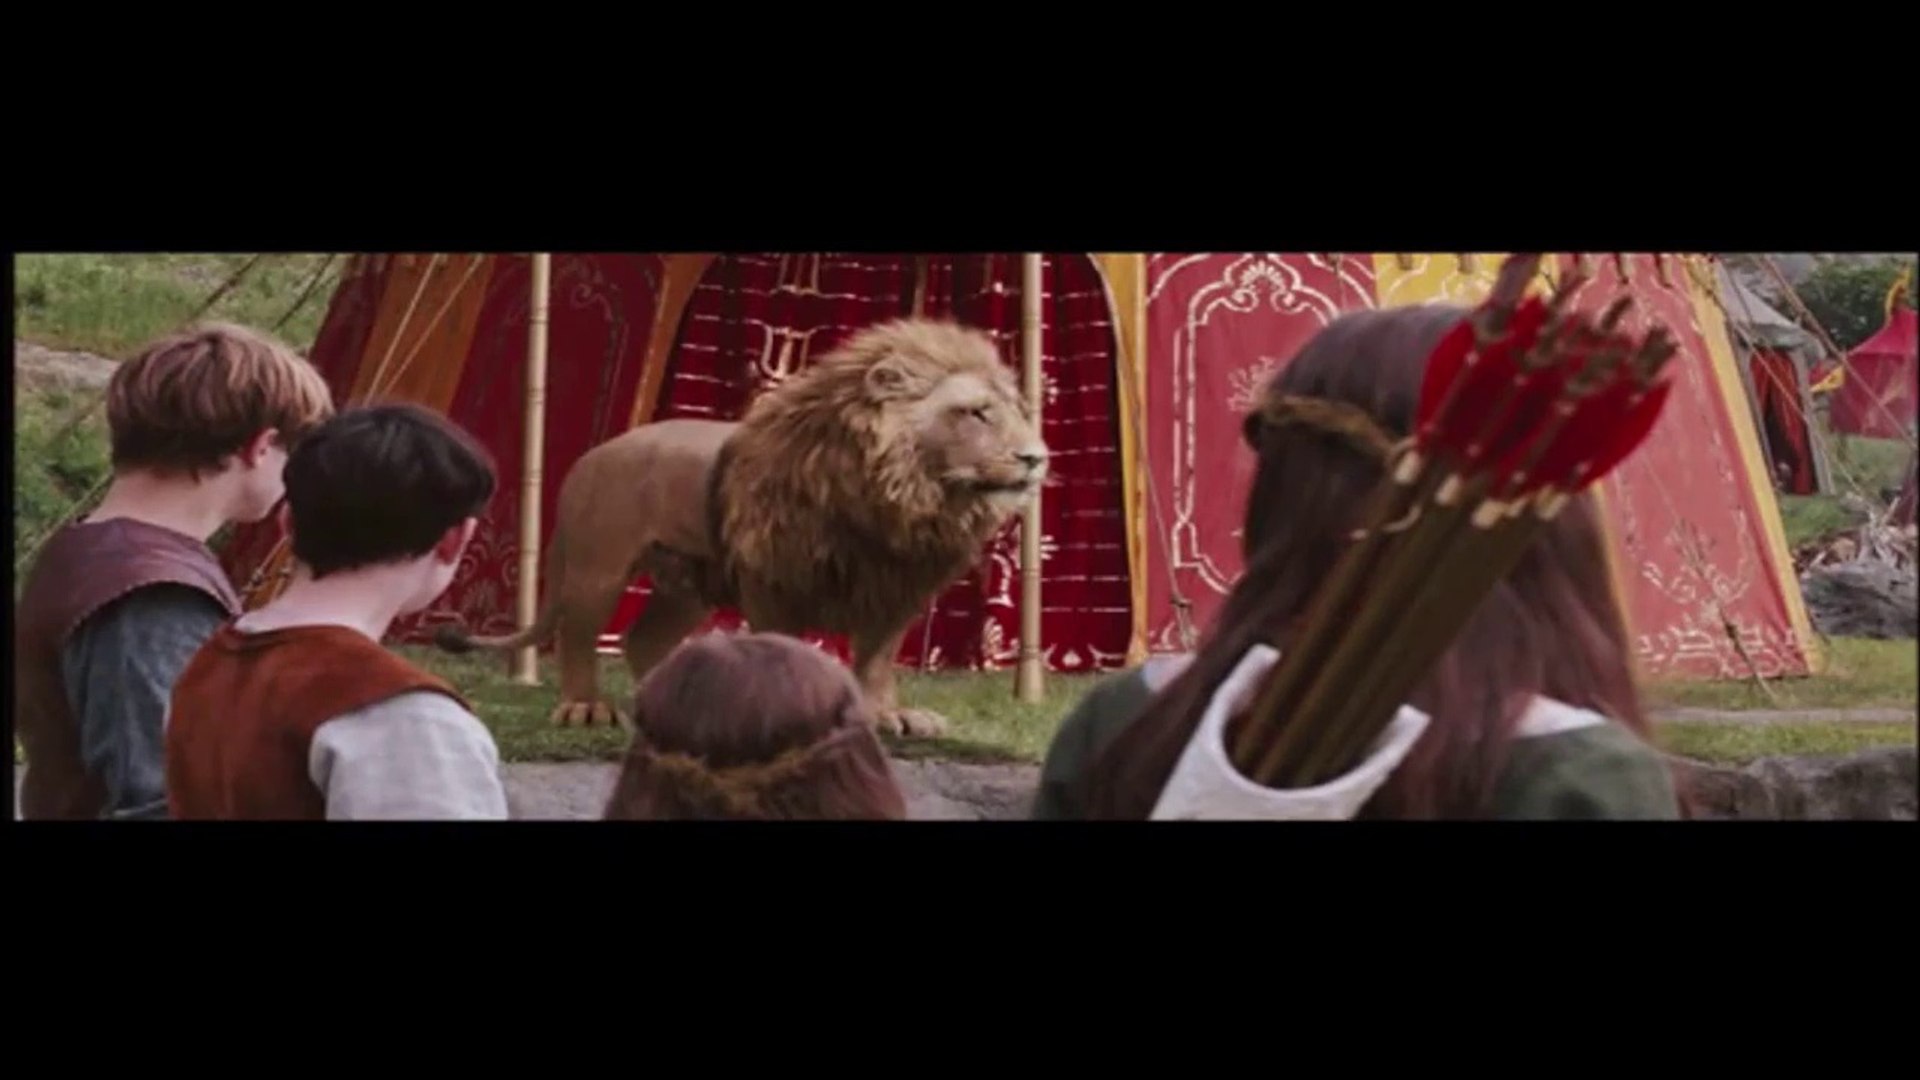 Meeting Aslan - Narnia: The Lion, The Witch and the Wardrobe 